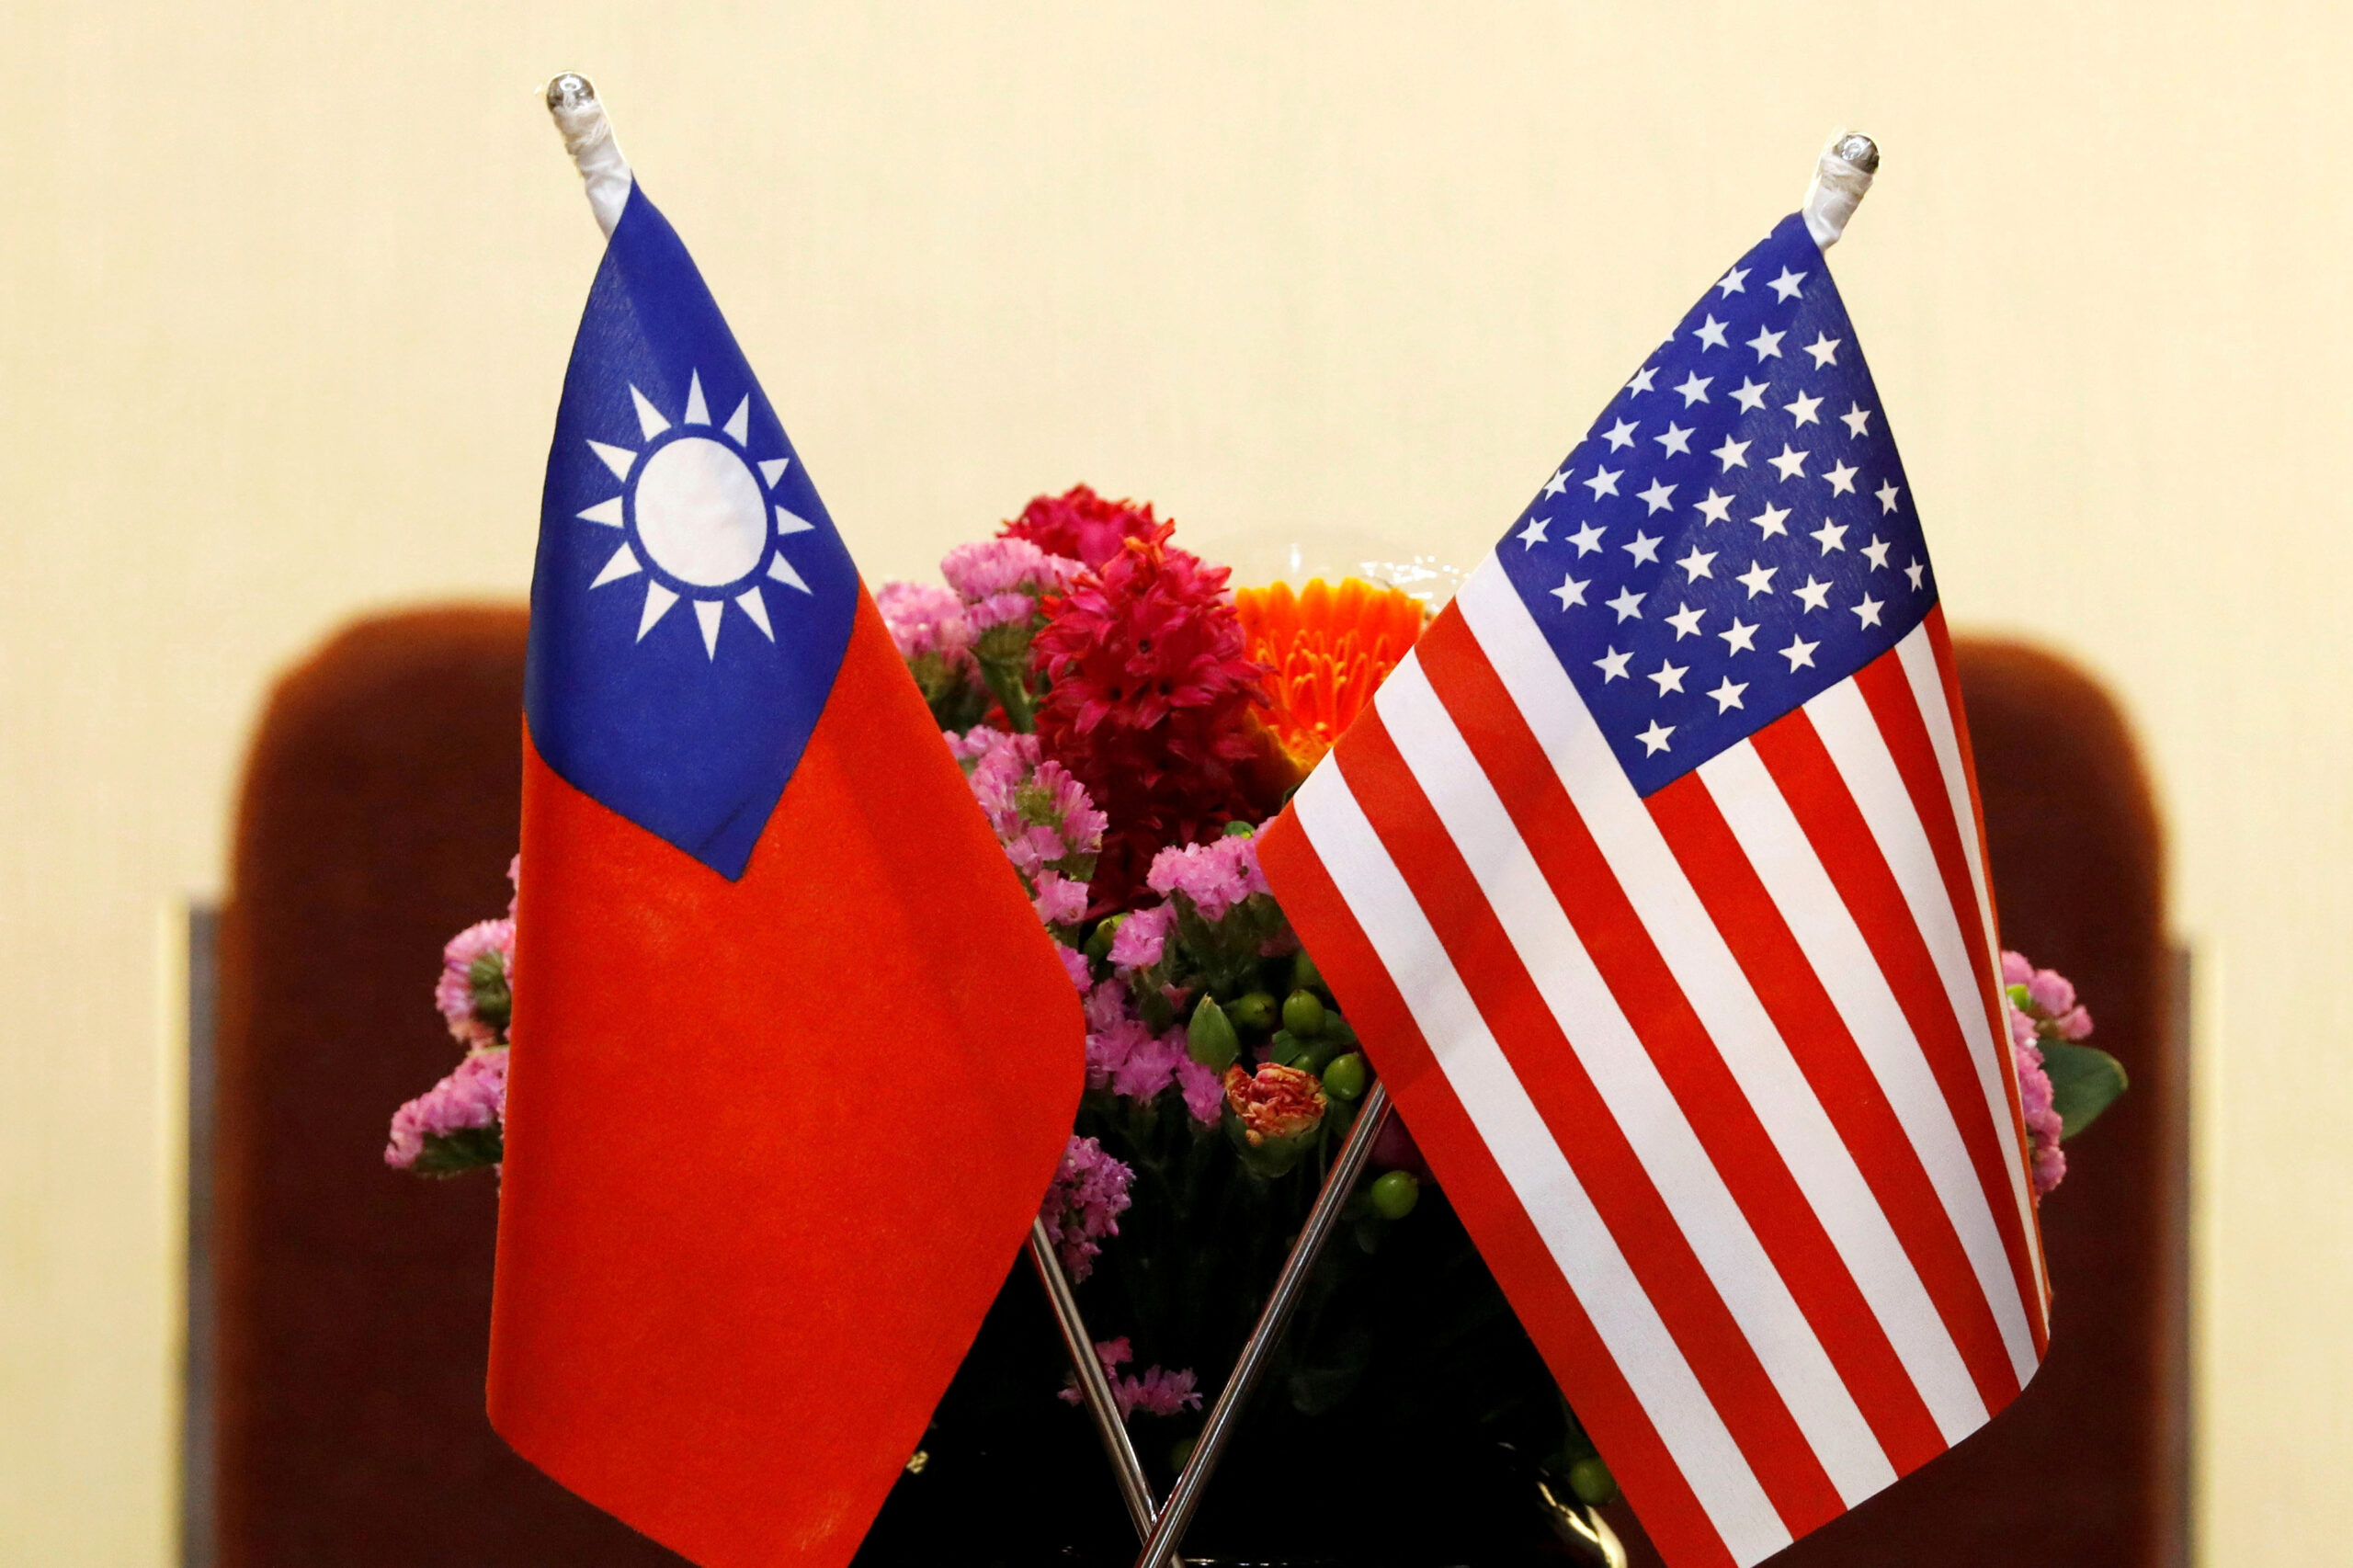 The United States and Taiwan reach an agreement on the first part of their "21st Century" trade initiative